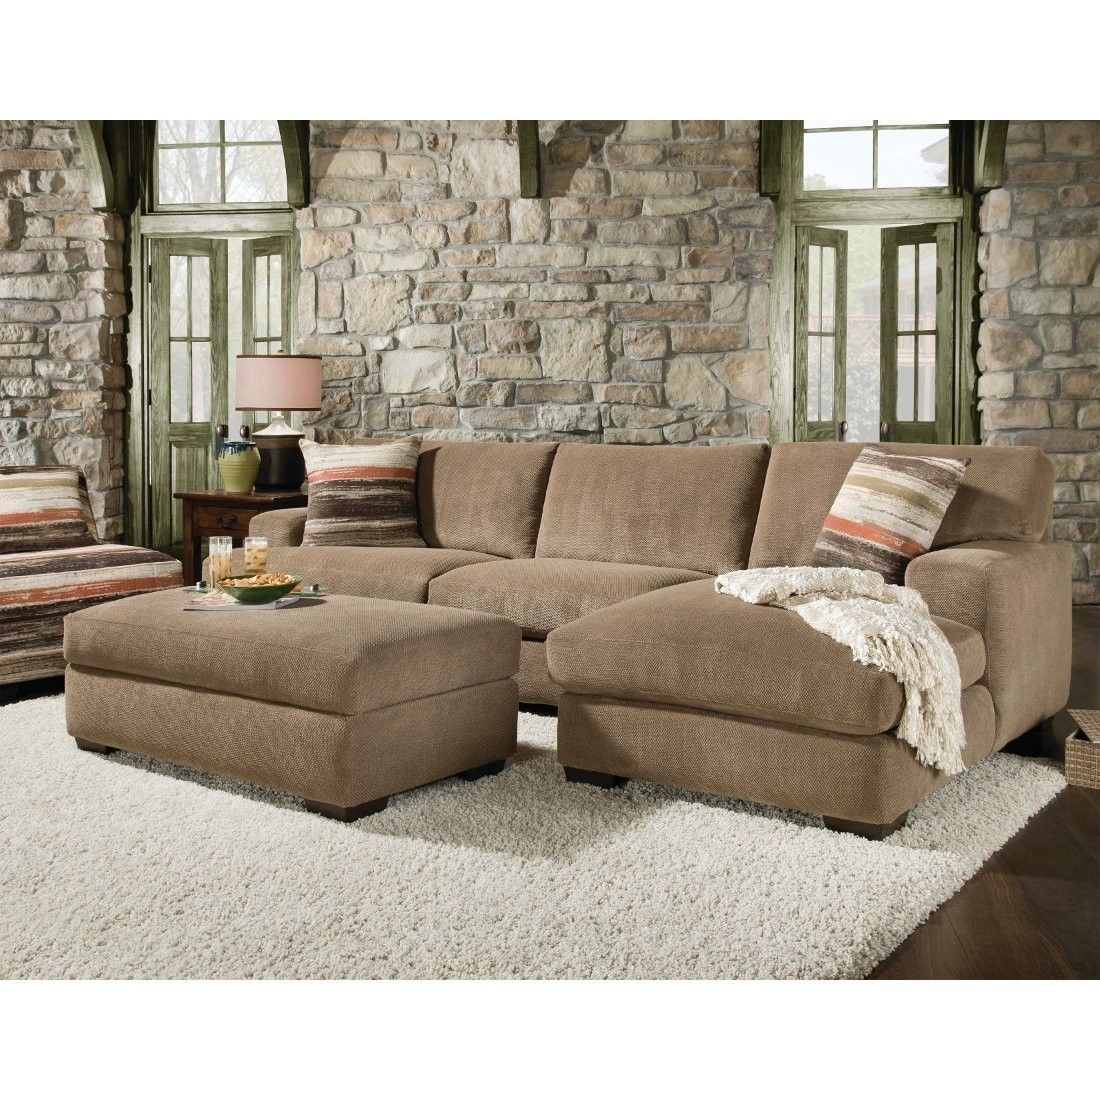 Beautiful Sectional Sofa With Chaise And Ottoman Pictures With Regard To Long Sectional Sofas With Chaise 